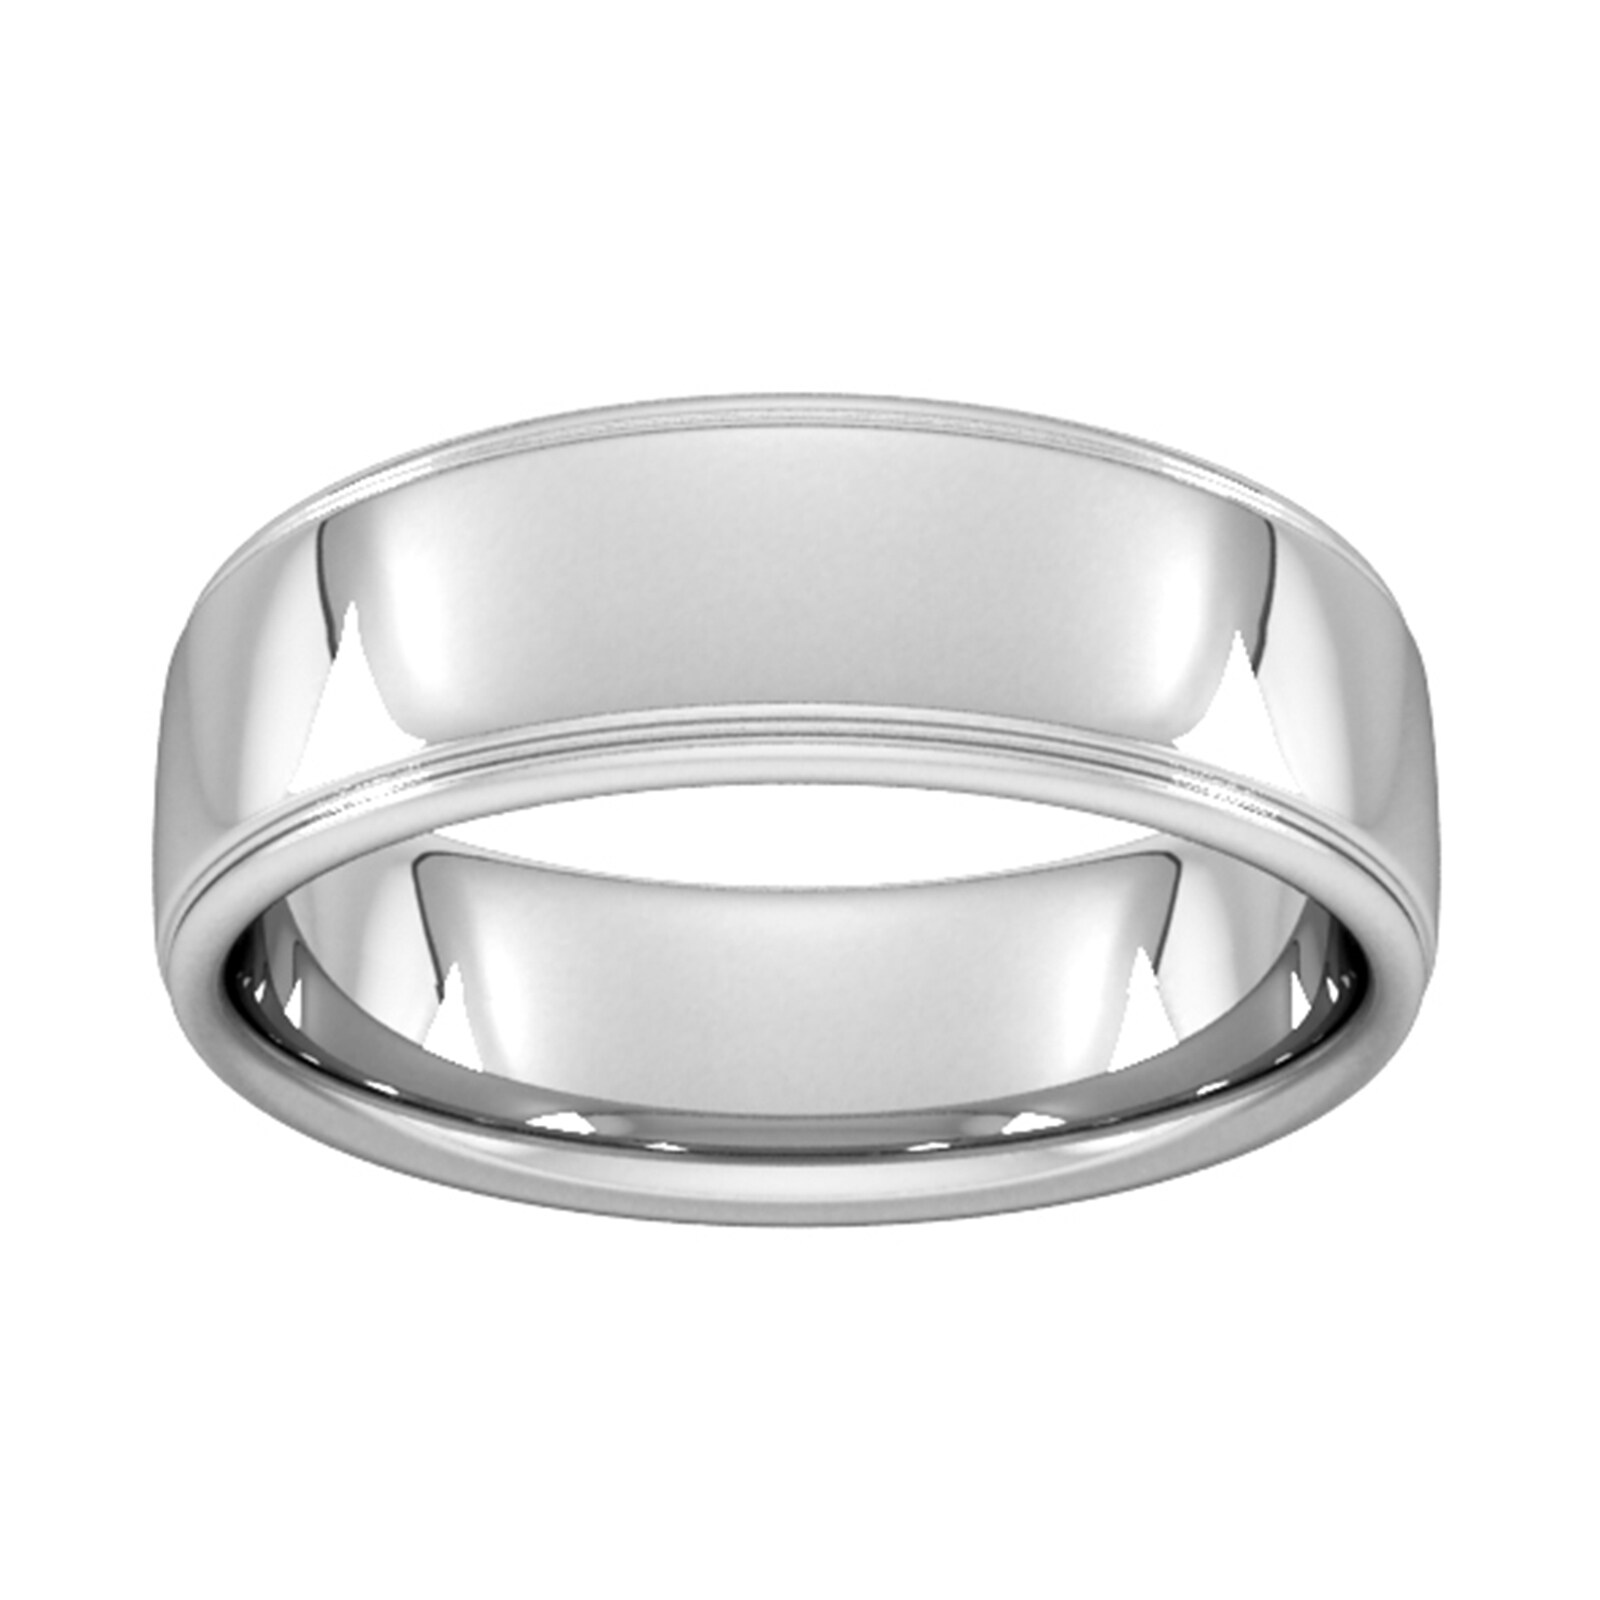 7mm Slight Court Standard Polished Finish With Grooves Wedding Ring In 18 Carat White Gold - Ring Size S